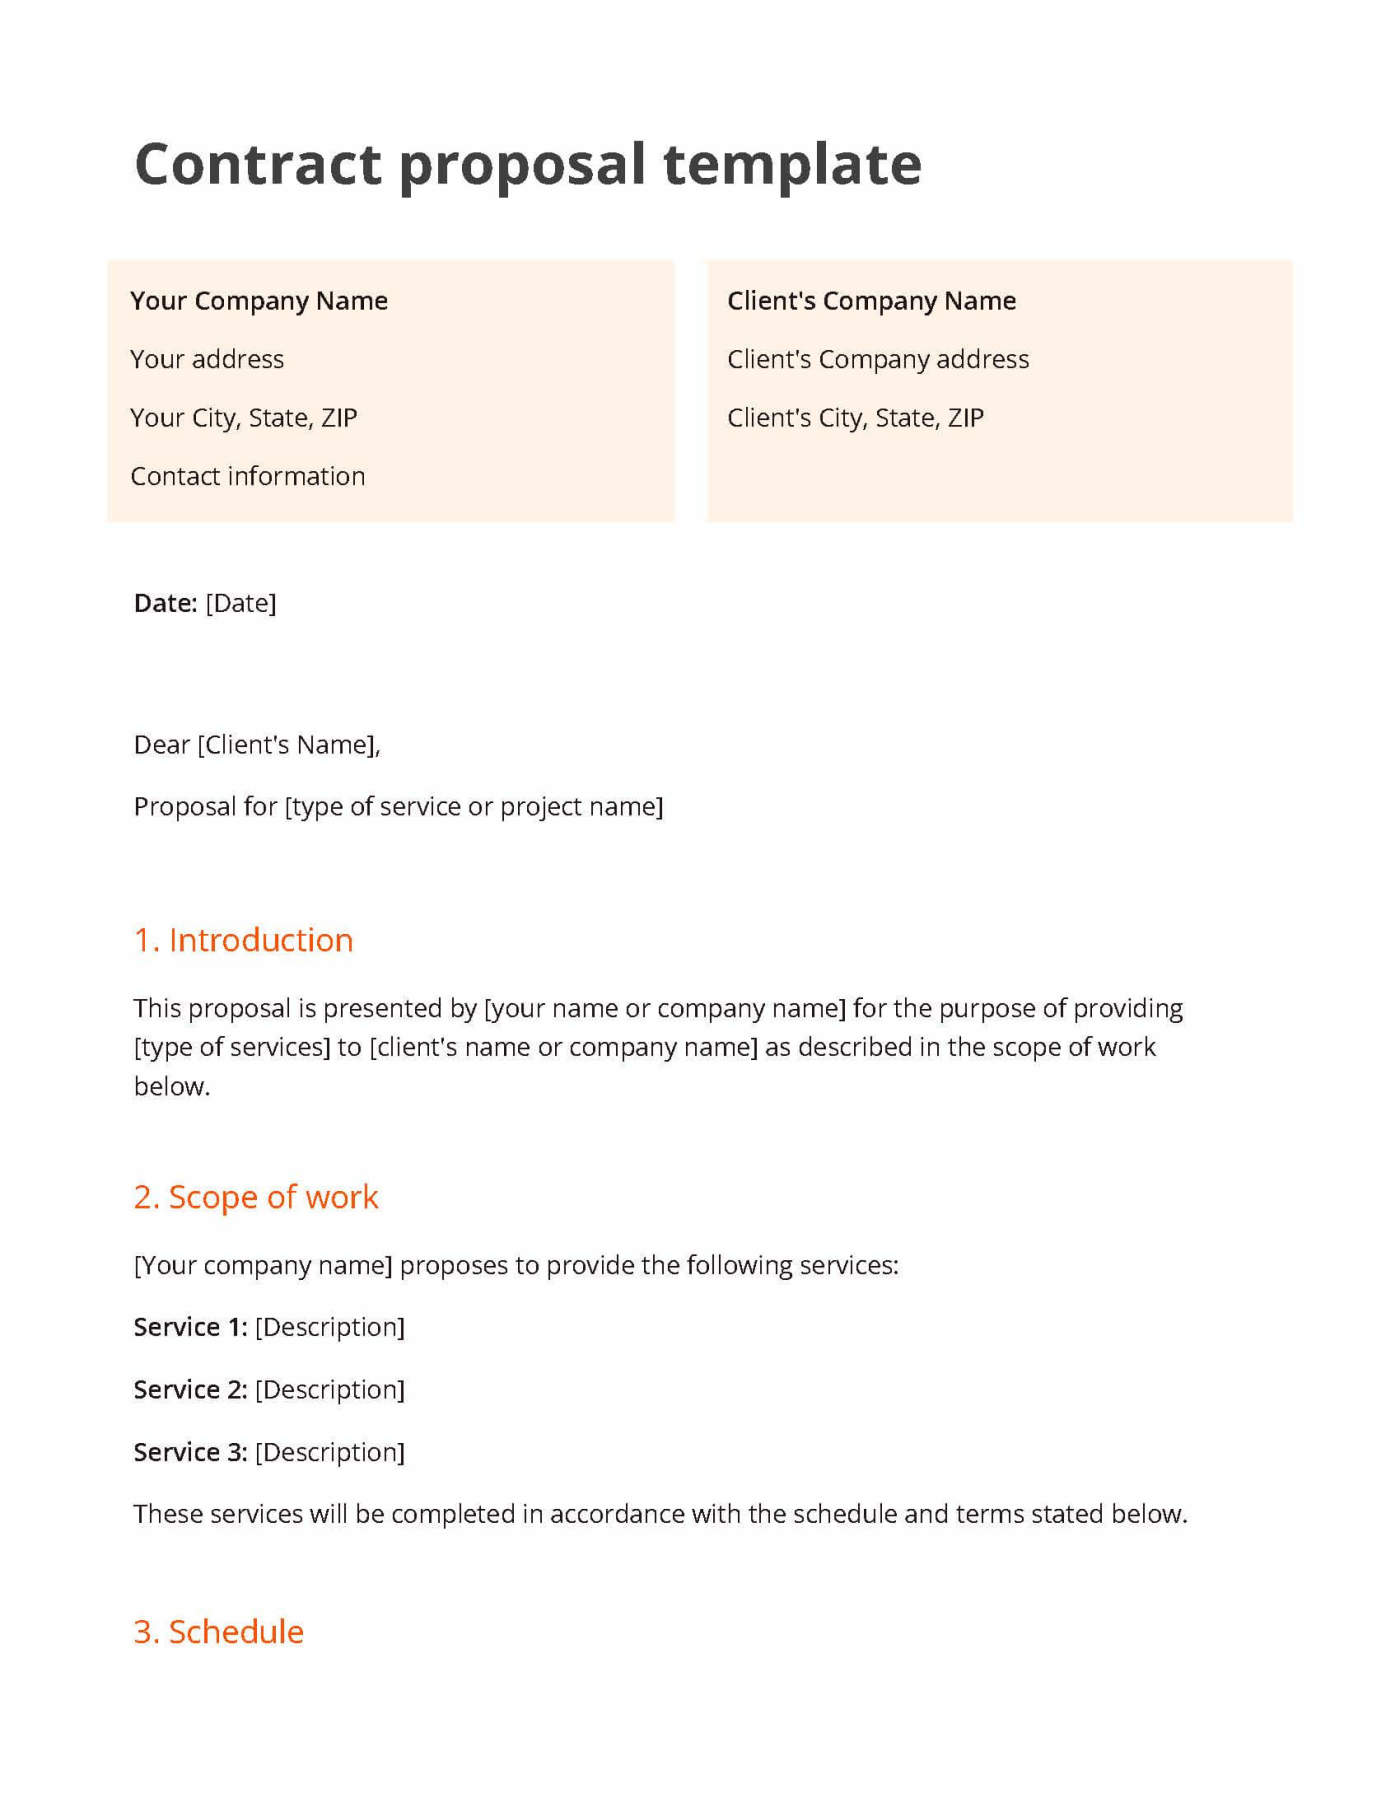 White and orange contract proposal template including a section for the introduction, scope of work and schedule